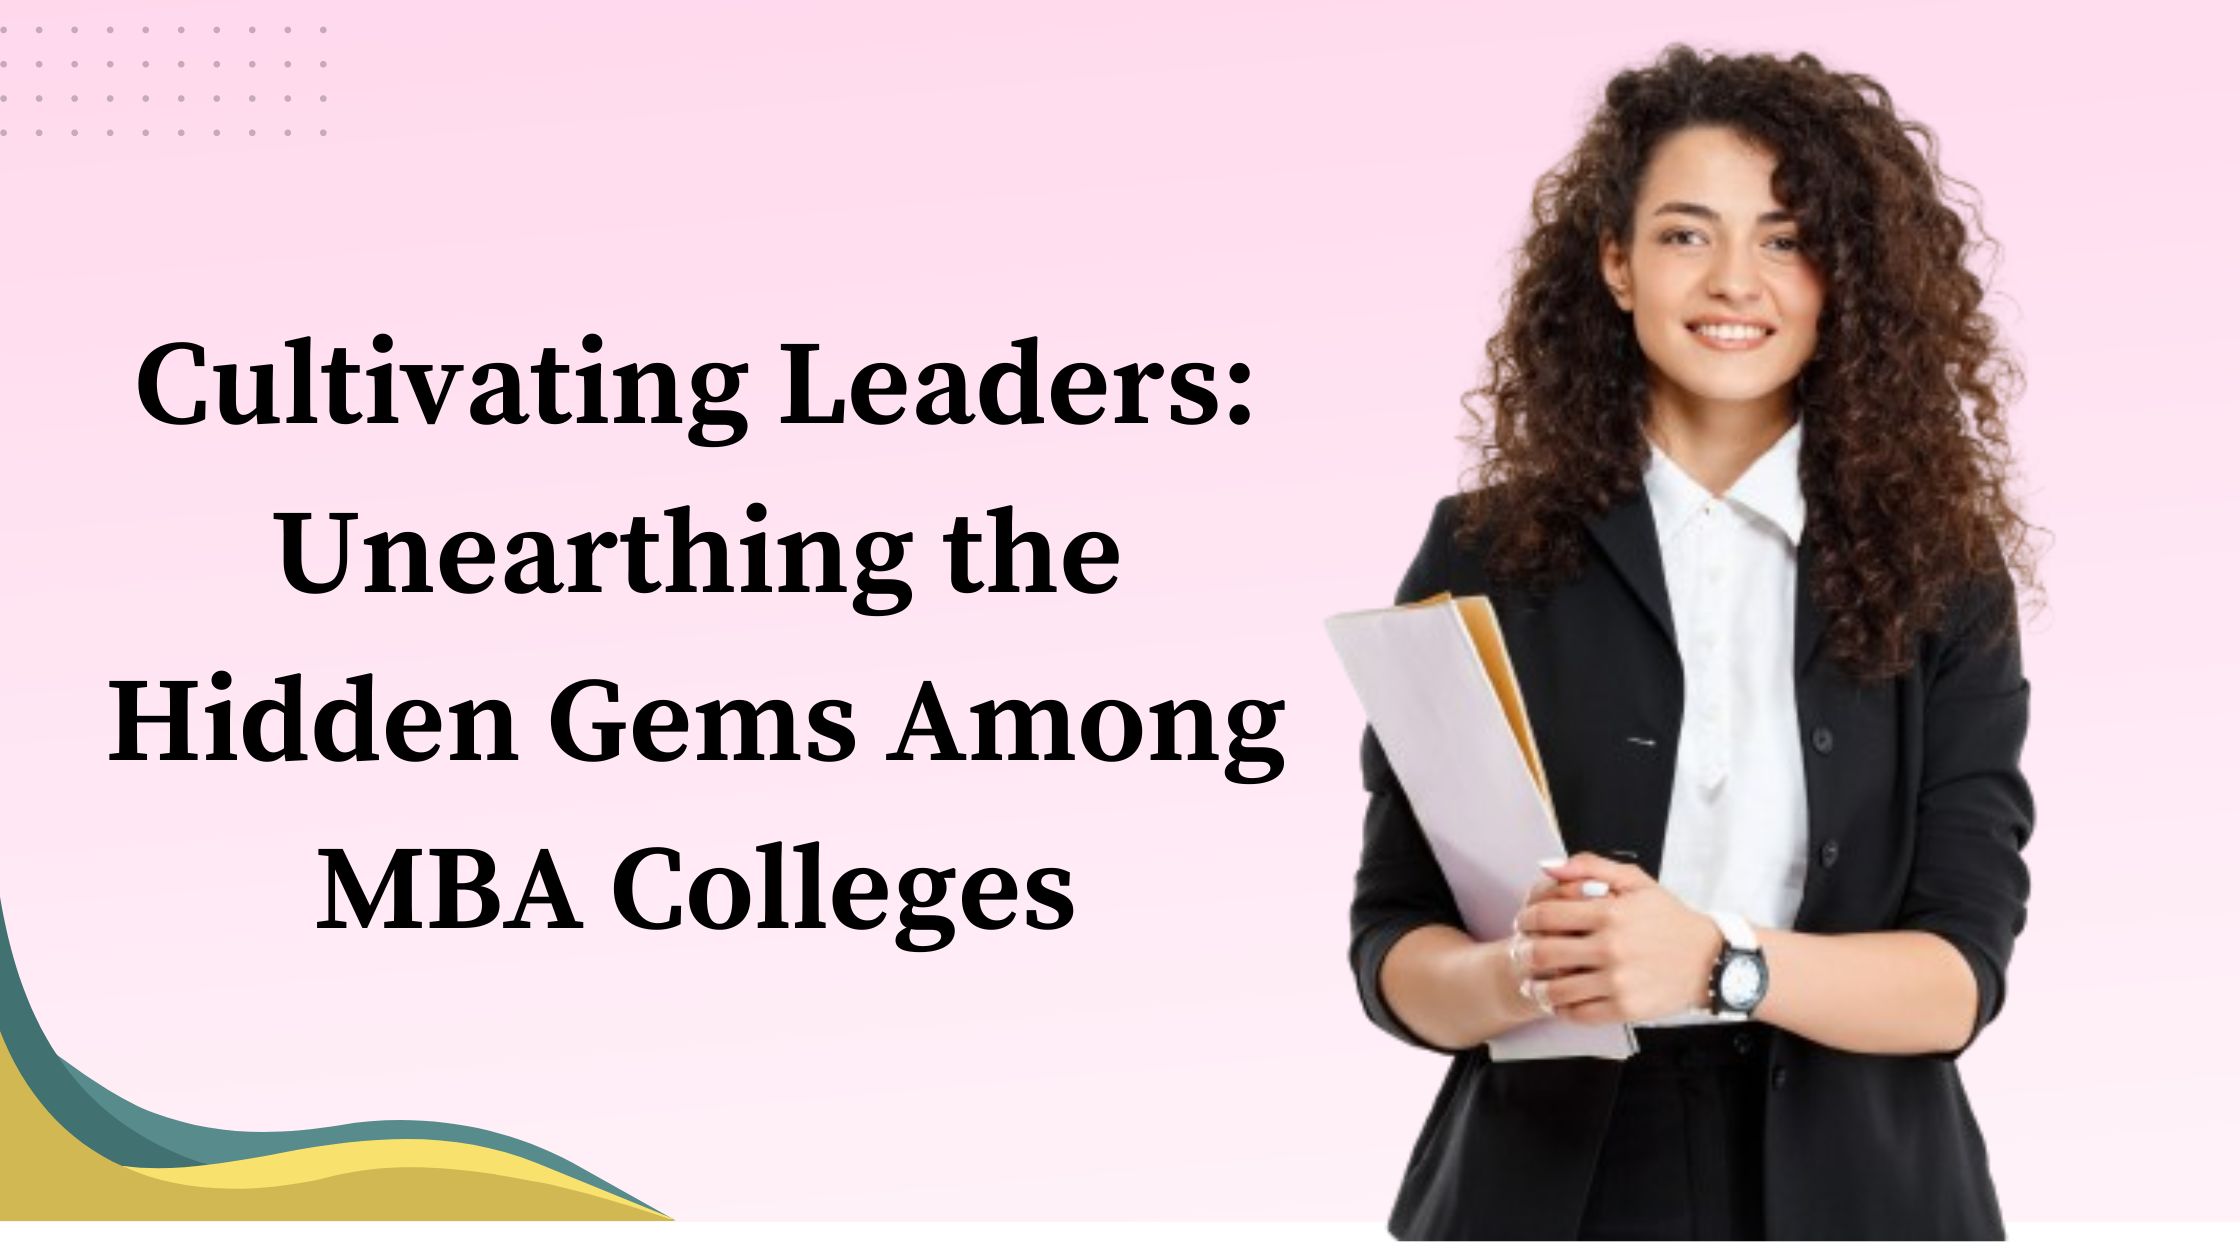 Cultivating Leaders: Unearthing the Hidden Gems Among MBA Colleges